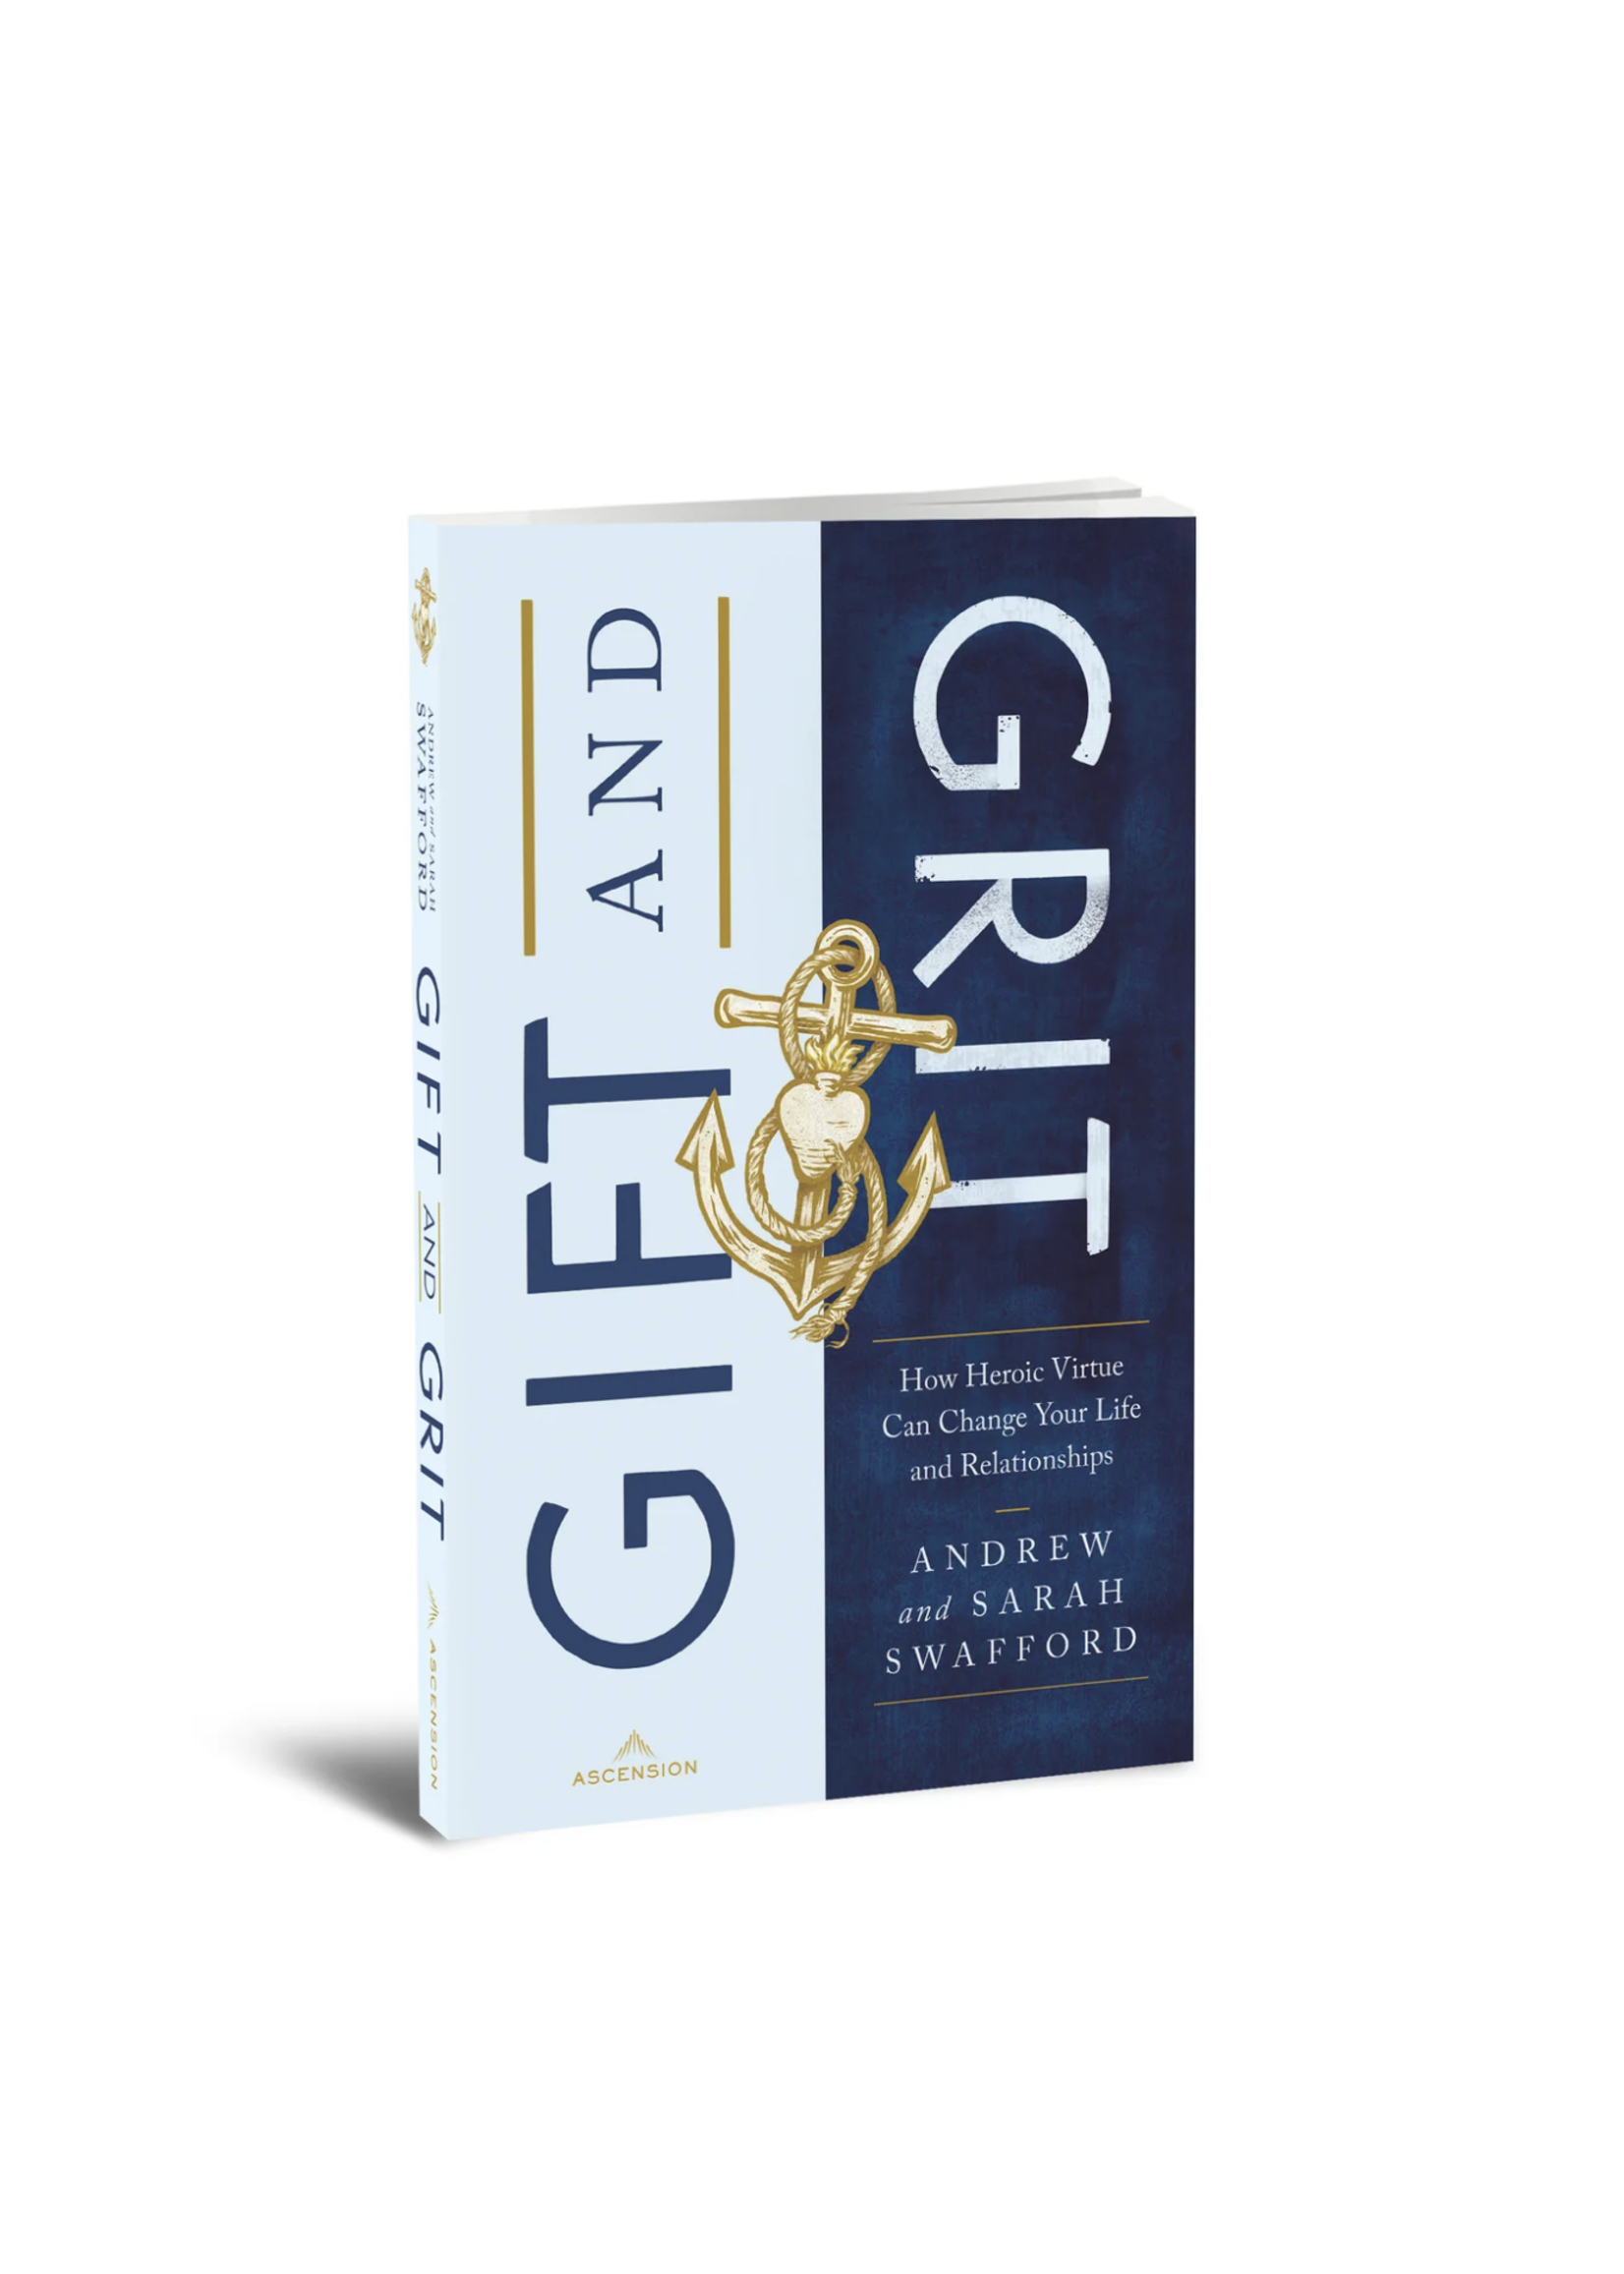 Ascension Press Gift and Grit: How Heroic Virtue Can Change Your Life and Relationships